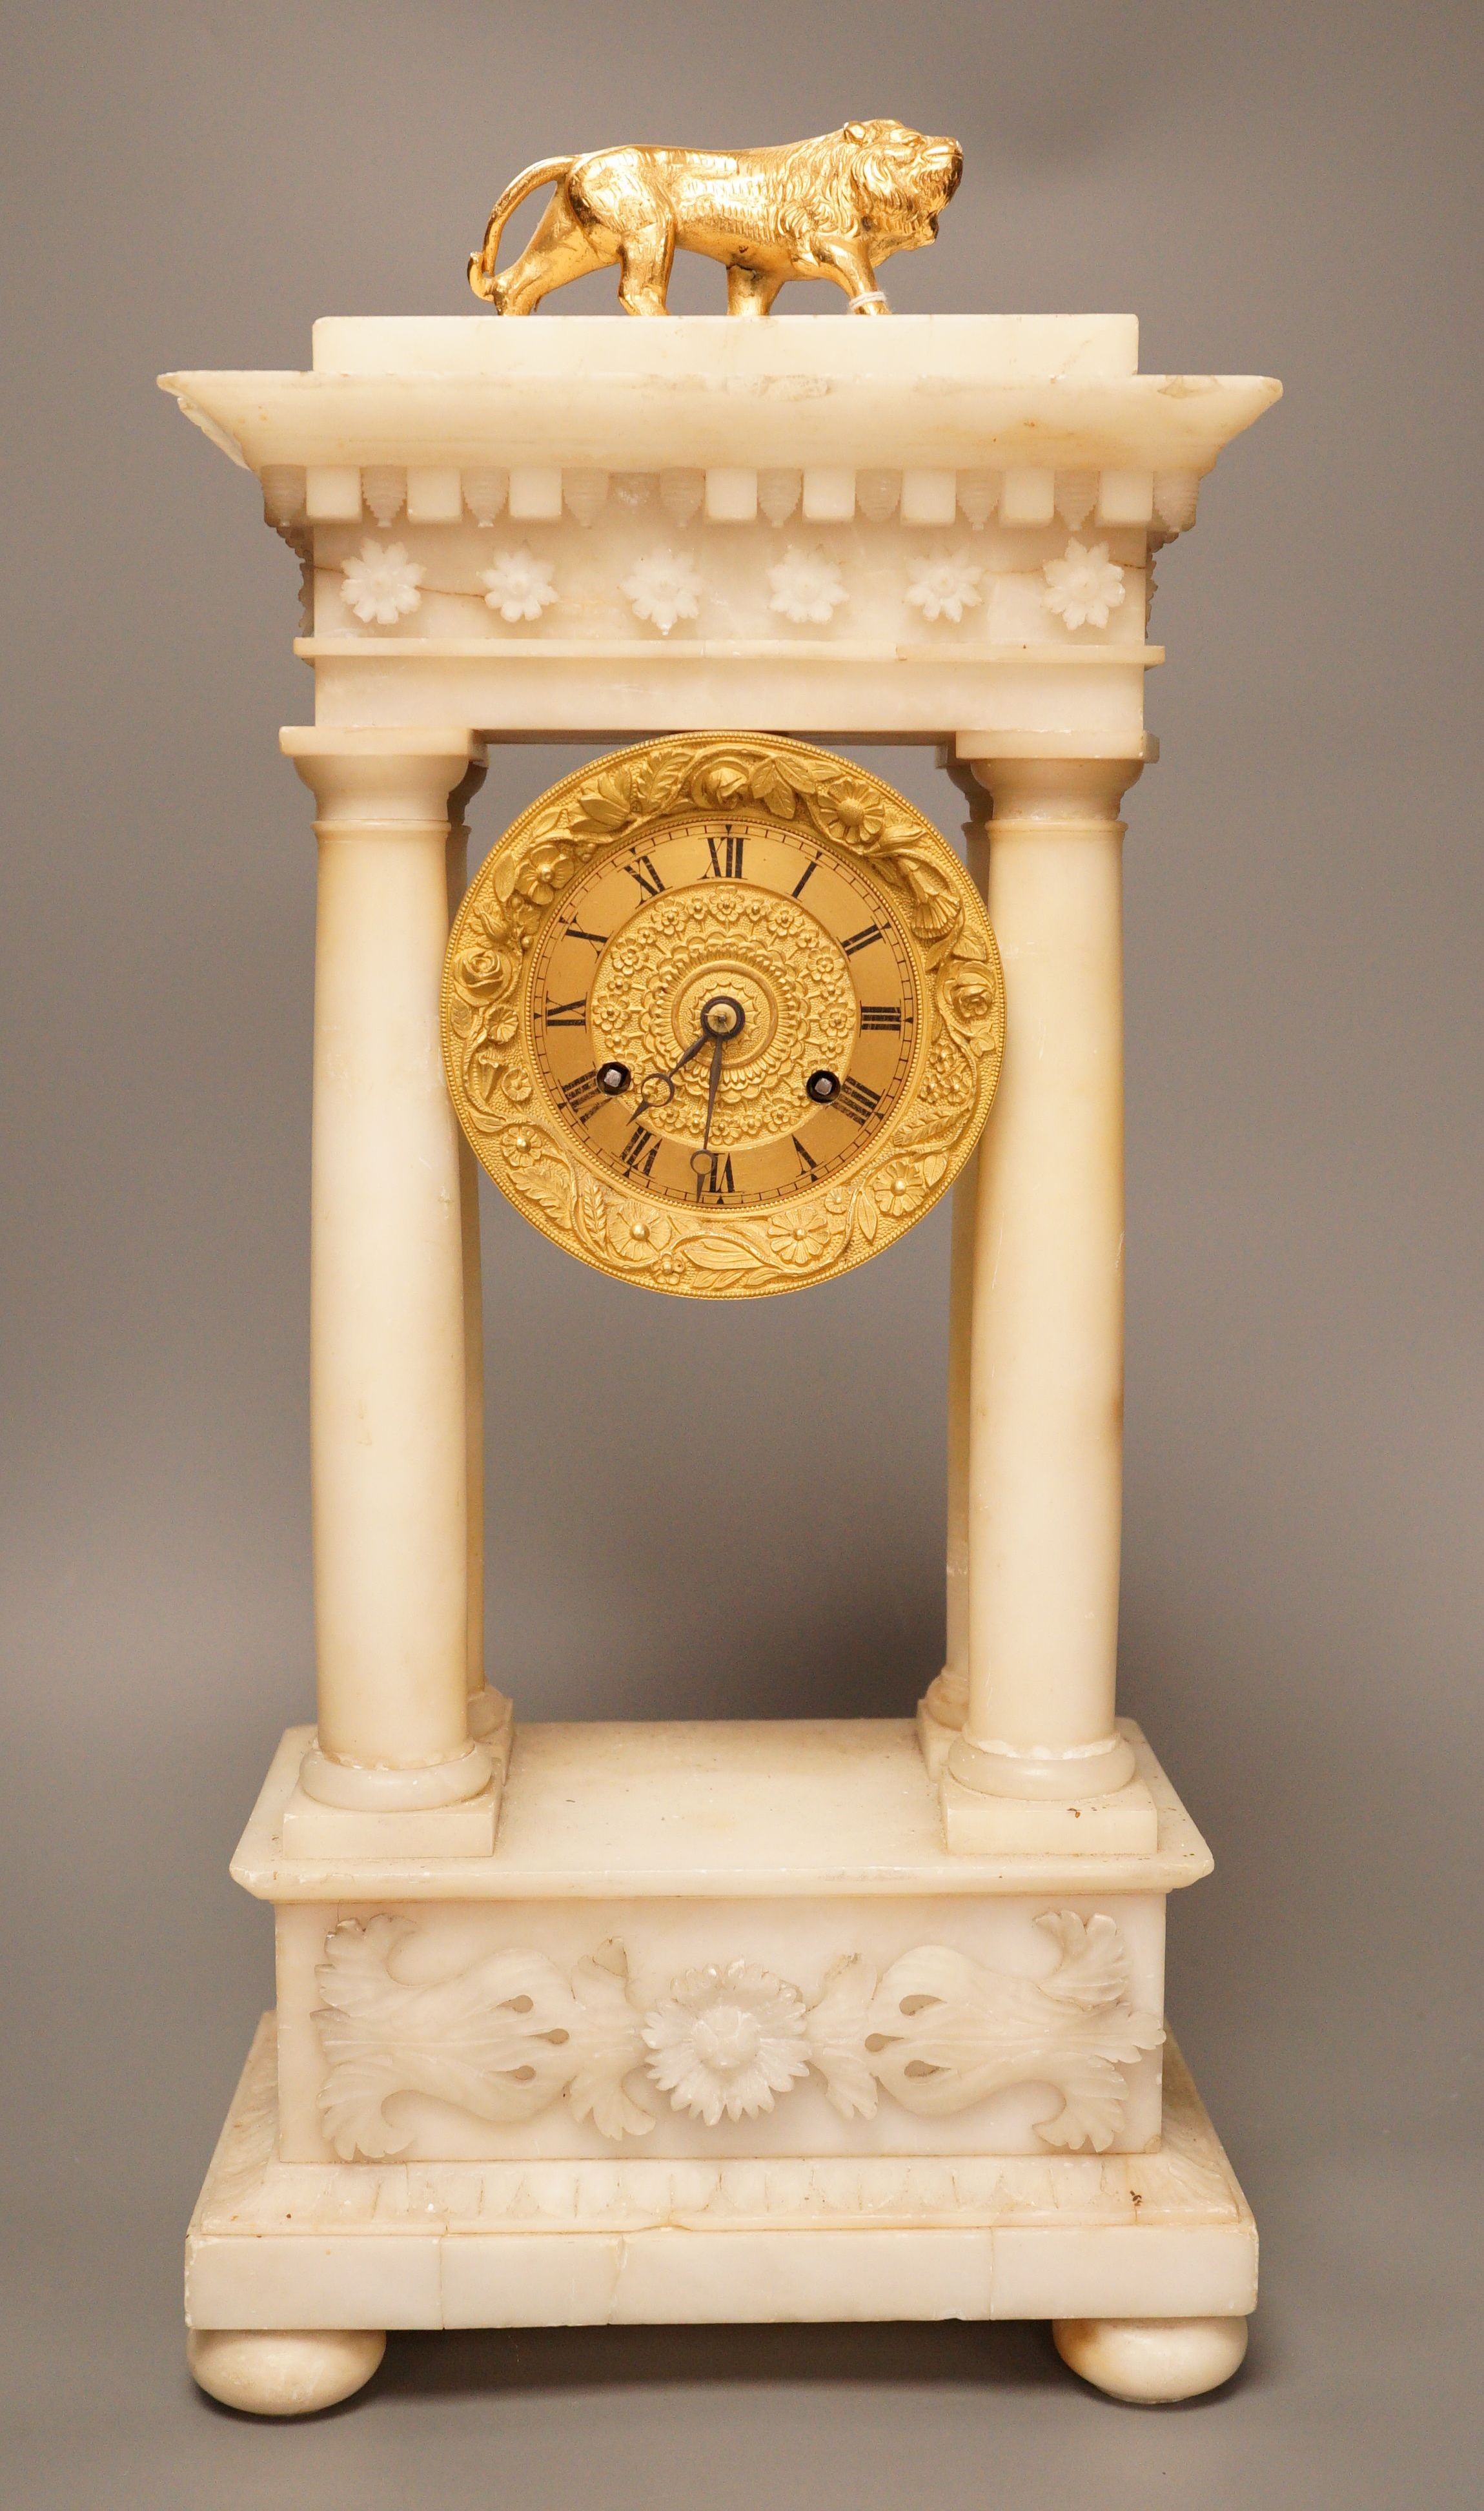 A 19th century alabaster portico clock with a gilt metal prowling lion decoration, 50cm tall